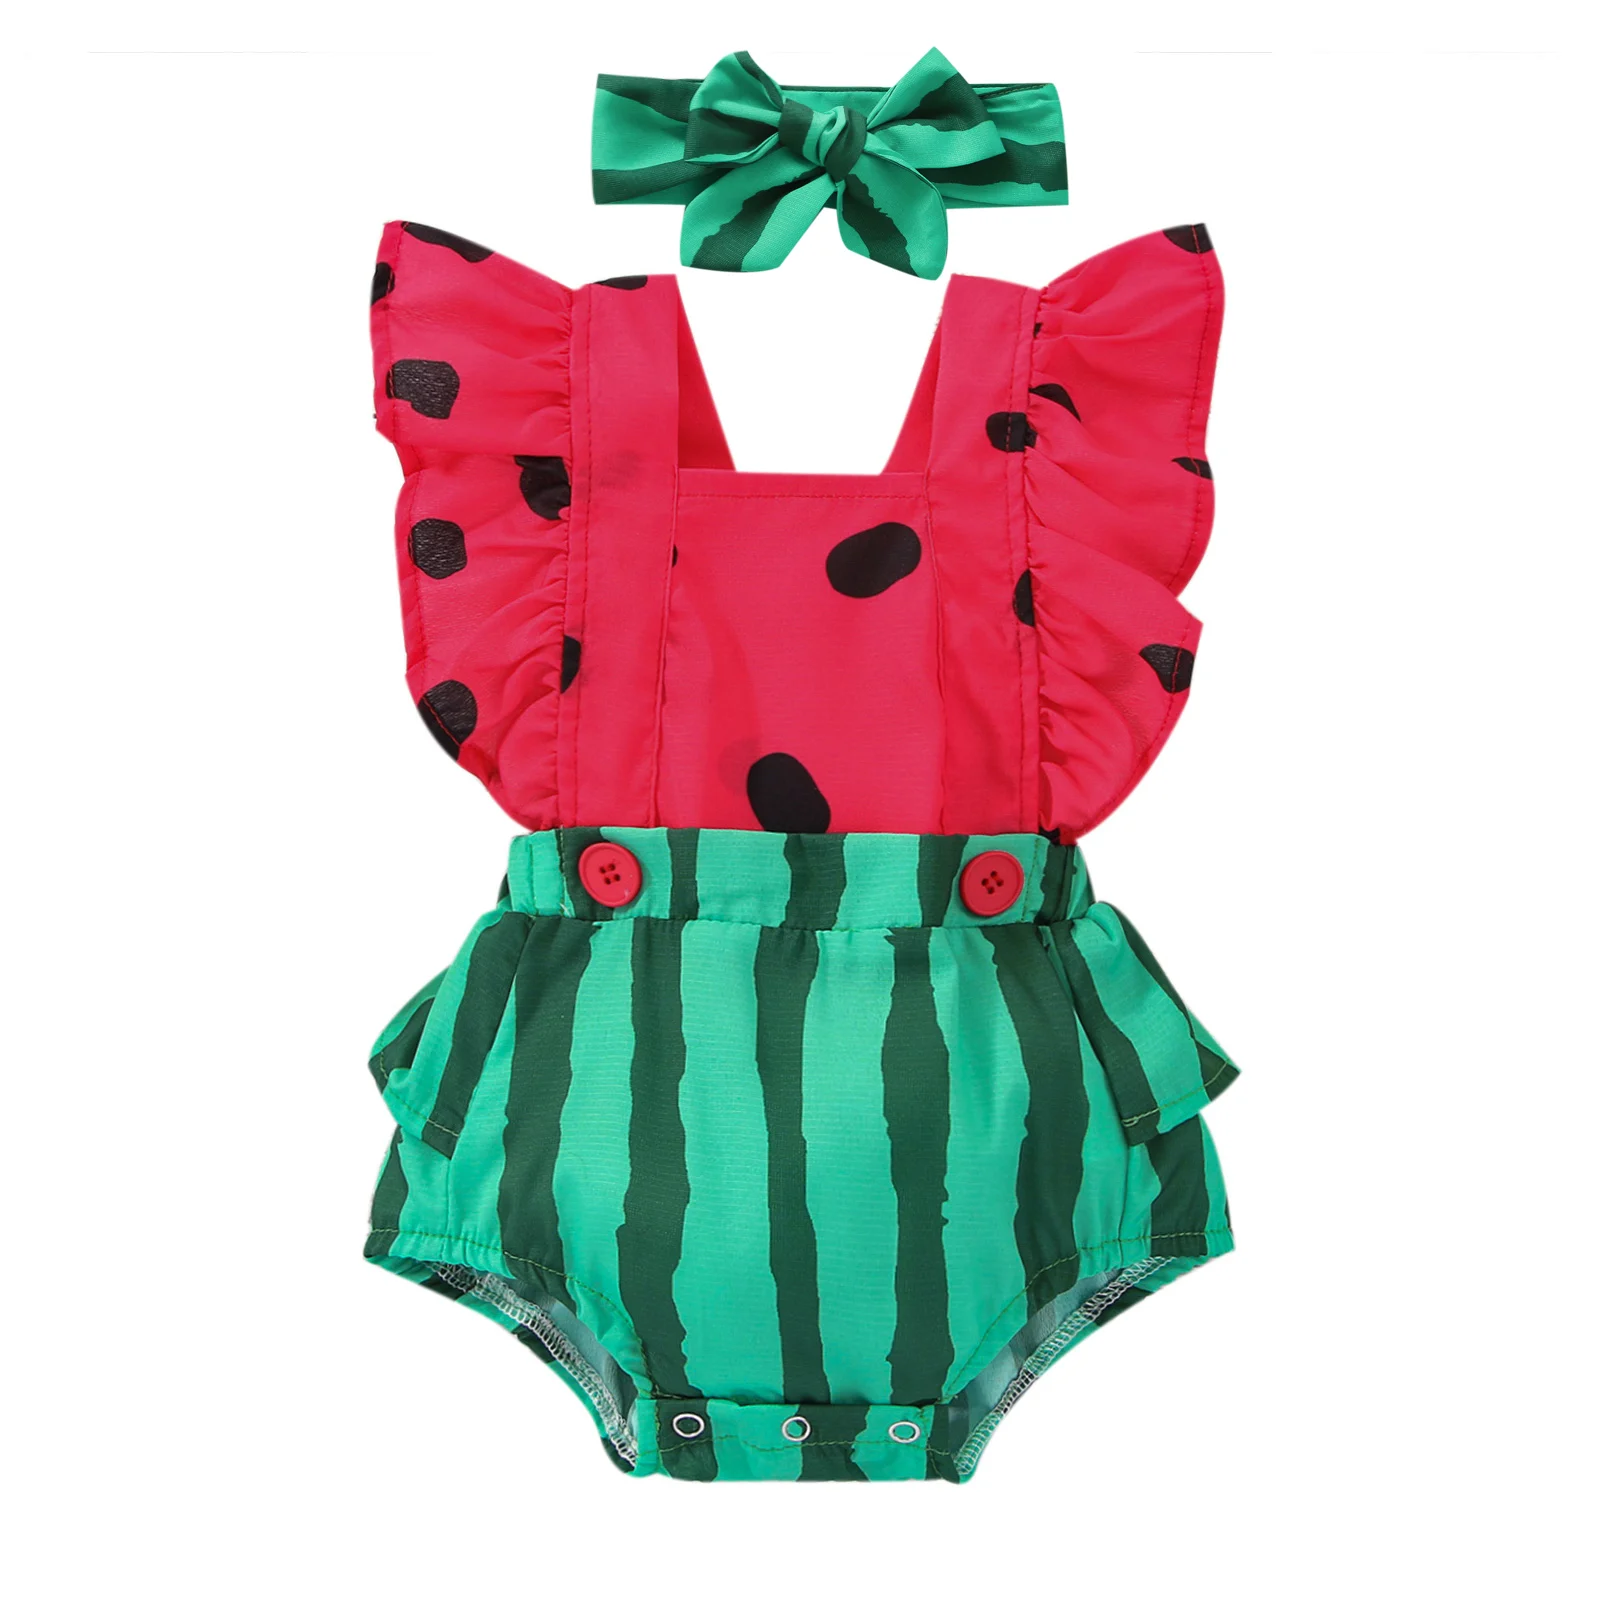 ma&baby 0-24M Newborn Infant Baby Girls Romper Cute Watermelon Jumpsuit Playsuit Sunsuit Summer Clothing Overalls D01 best Baby Bodysuits Baby Rompers